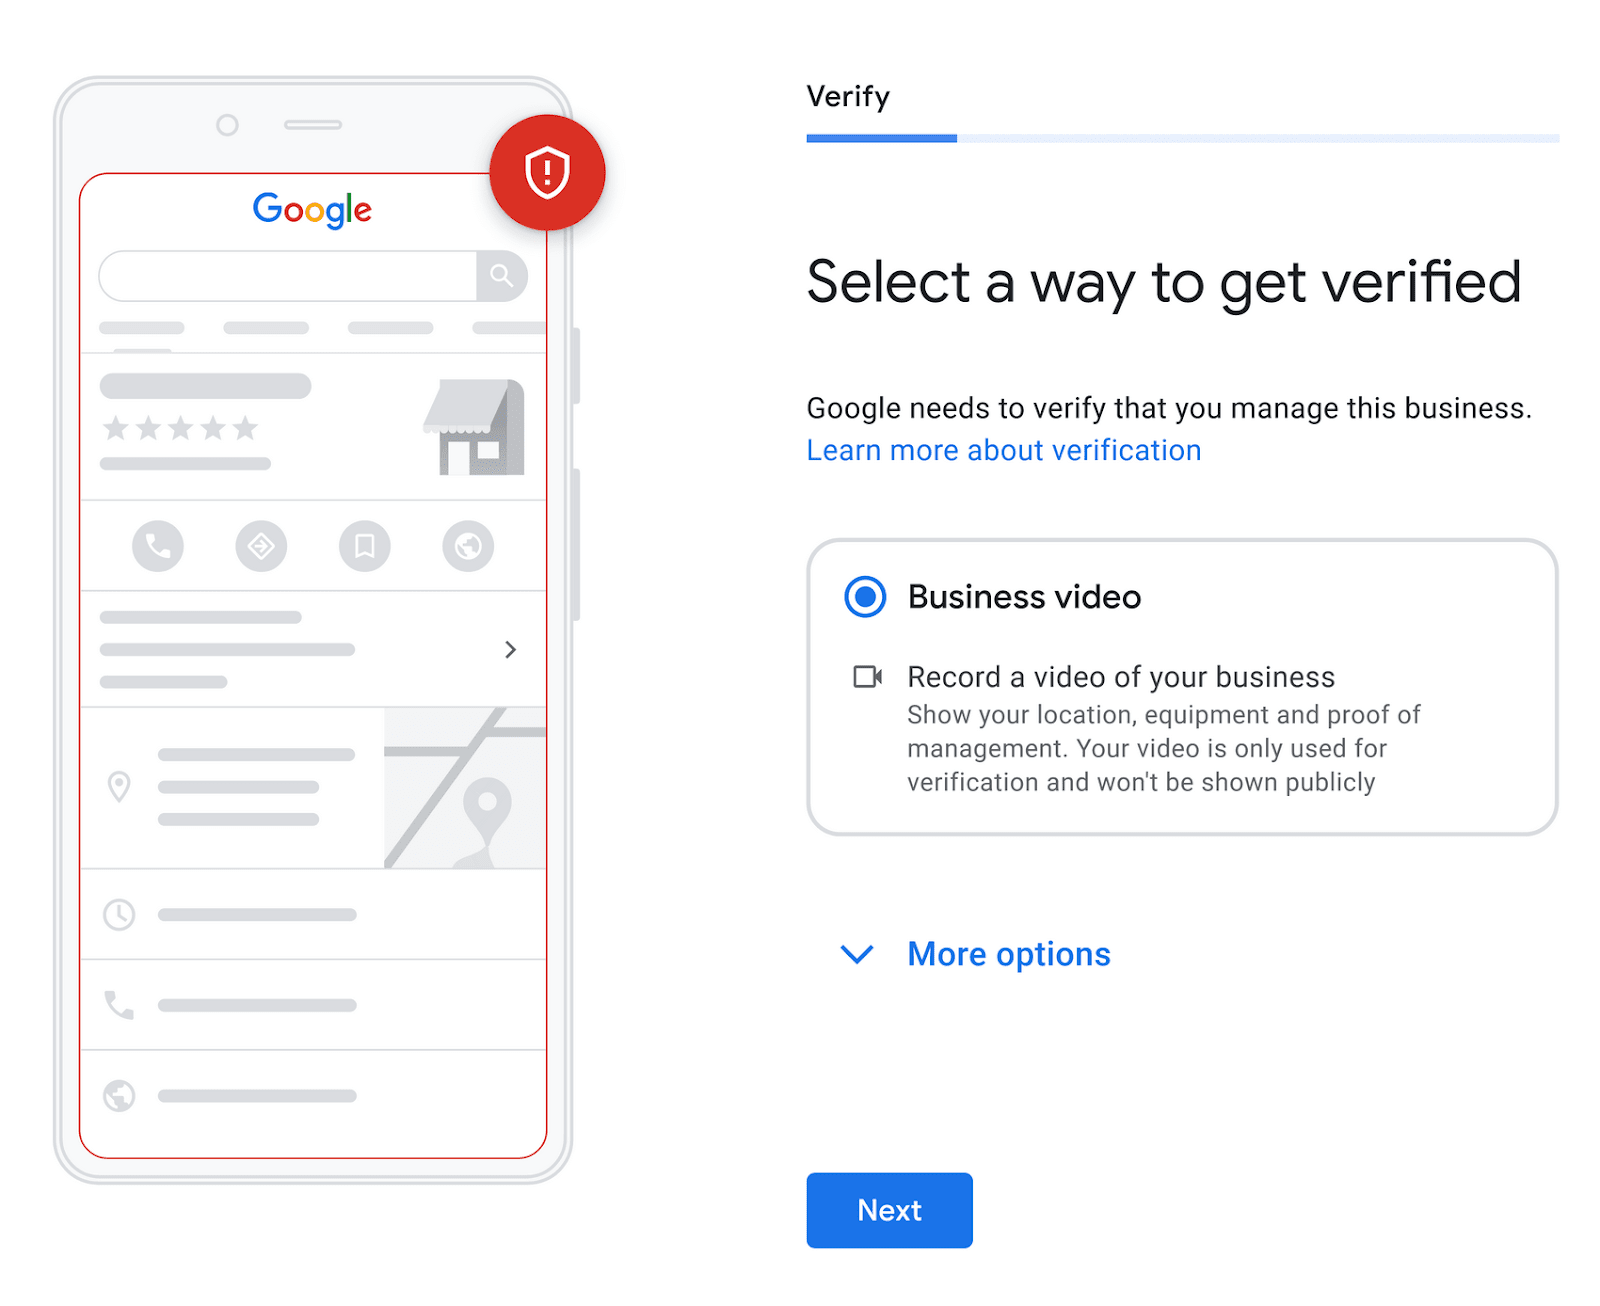 "Select a way to get verified" step of creating a GBP